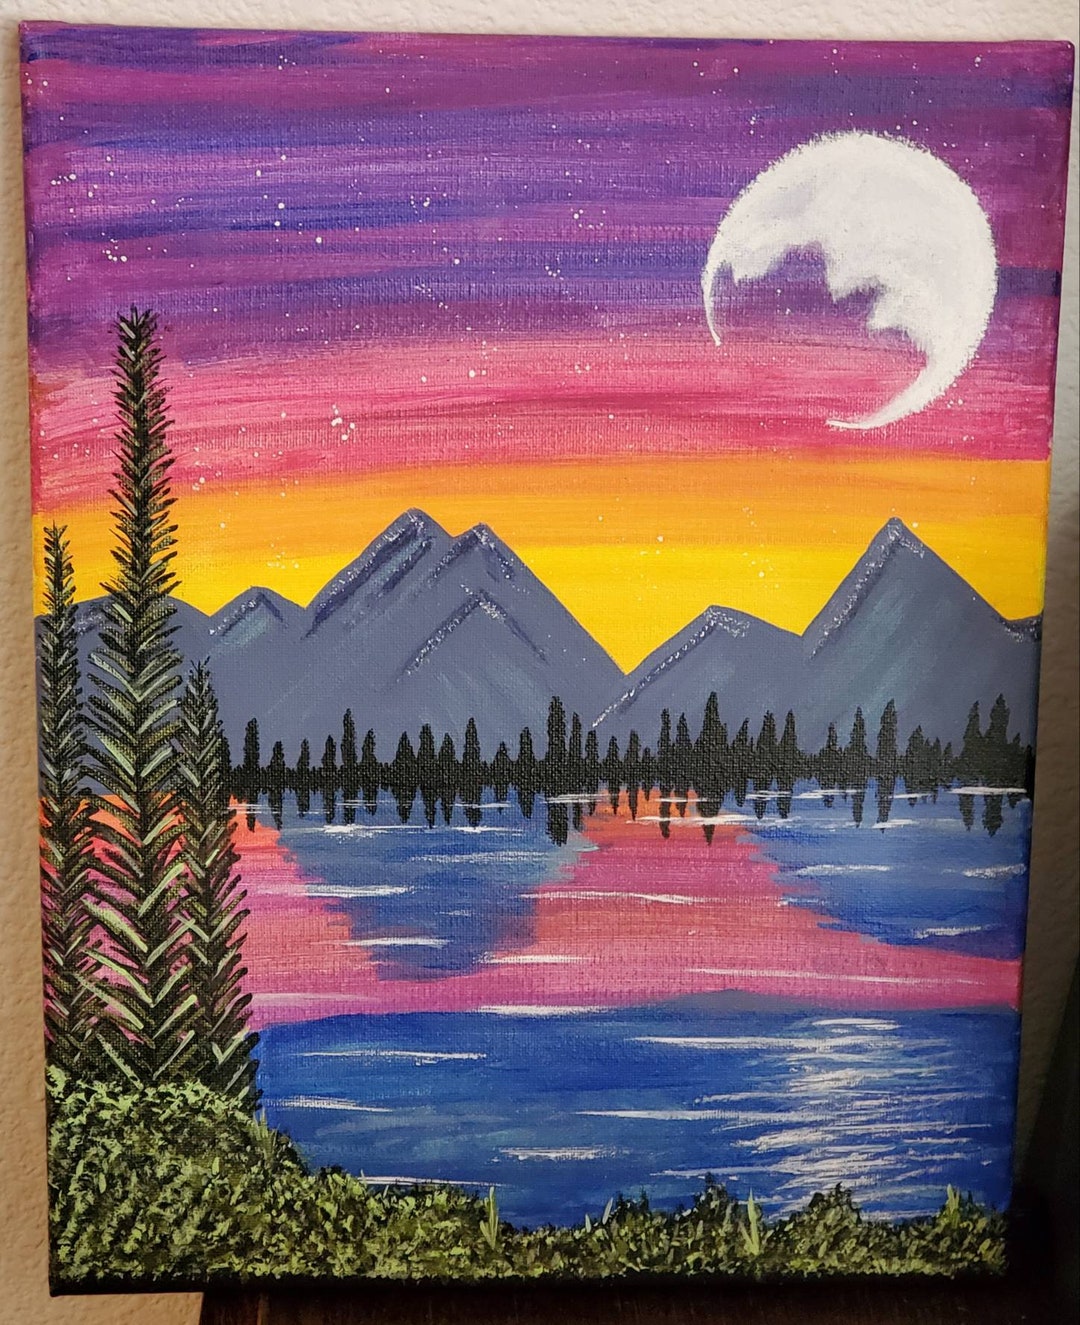 PINK SUNSET / ACRYLIC LANDSCAPE PAINTING / How To Paint For Beginners 